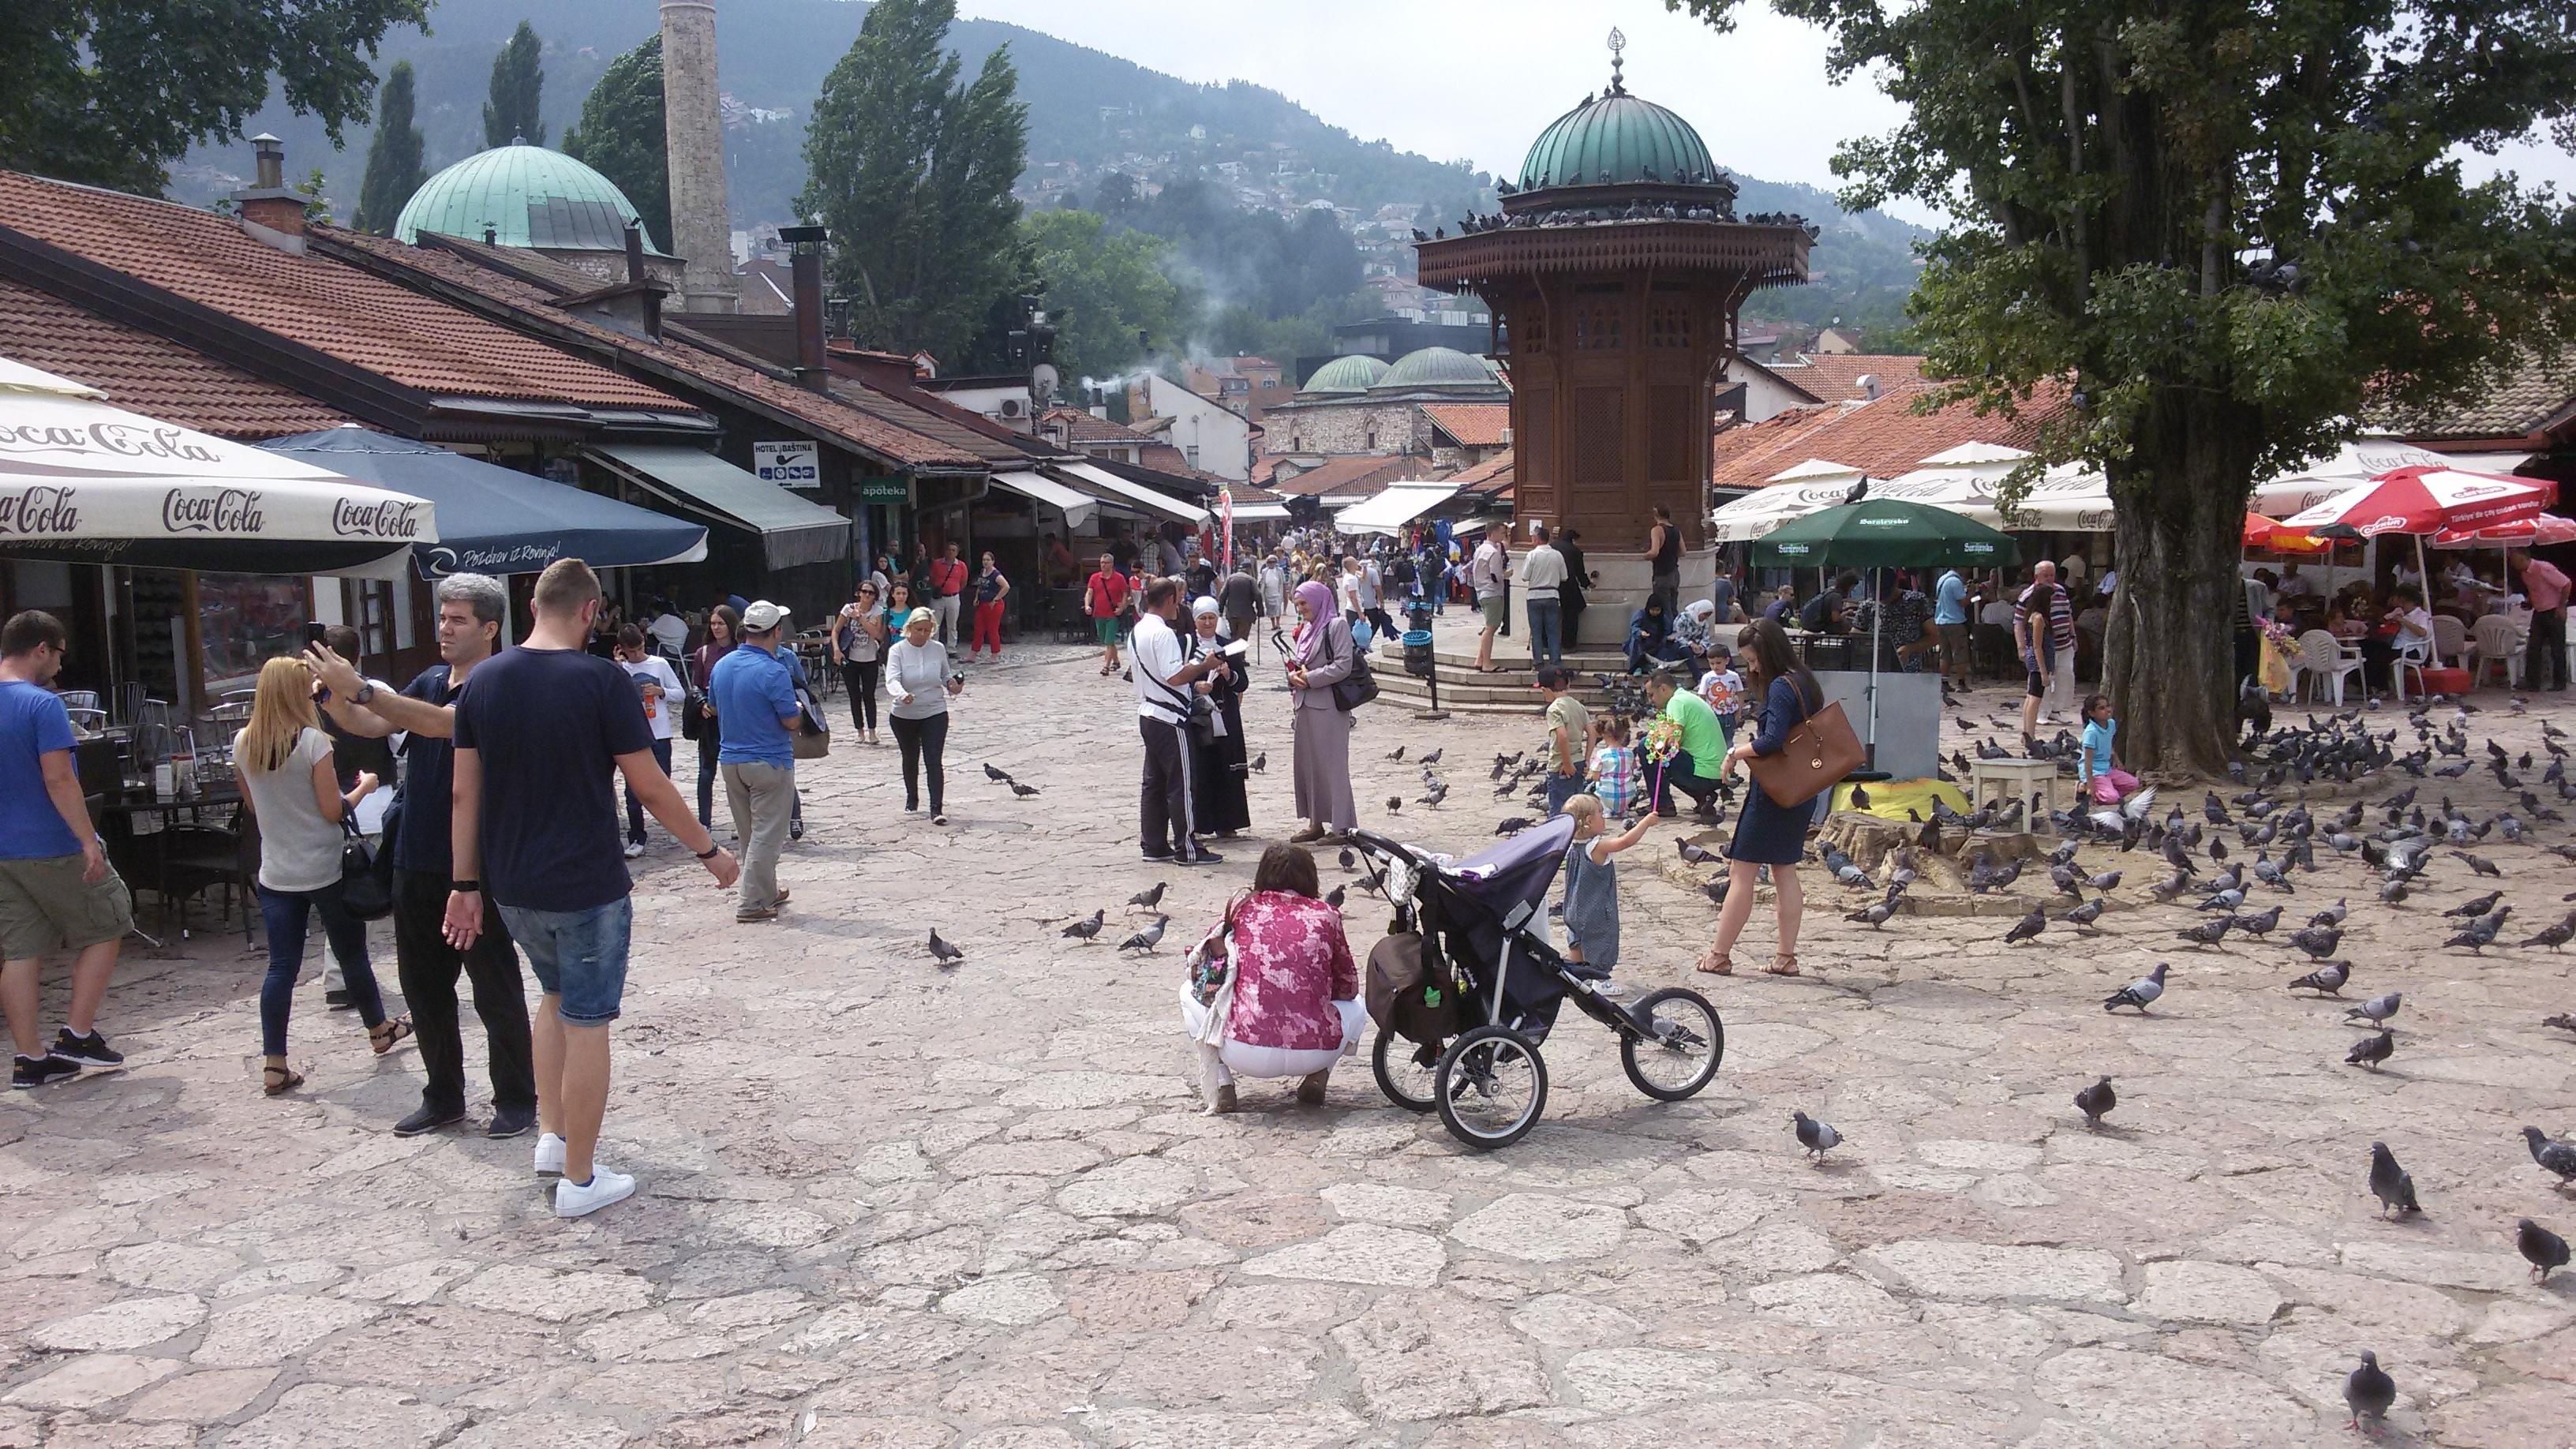 Sarajevo Canton government to subsidize the stay of tourists from Serbia